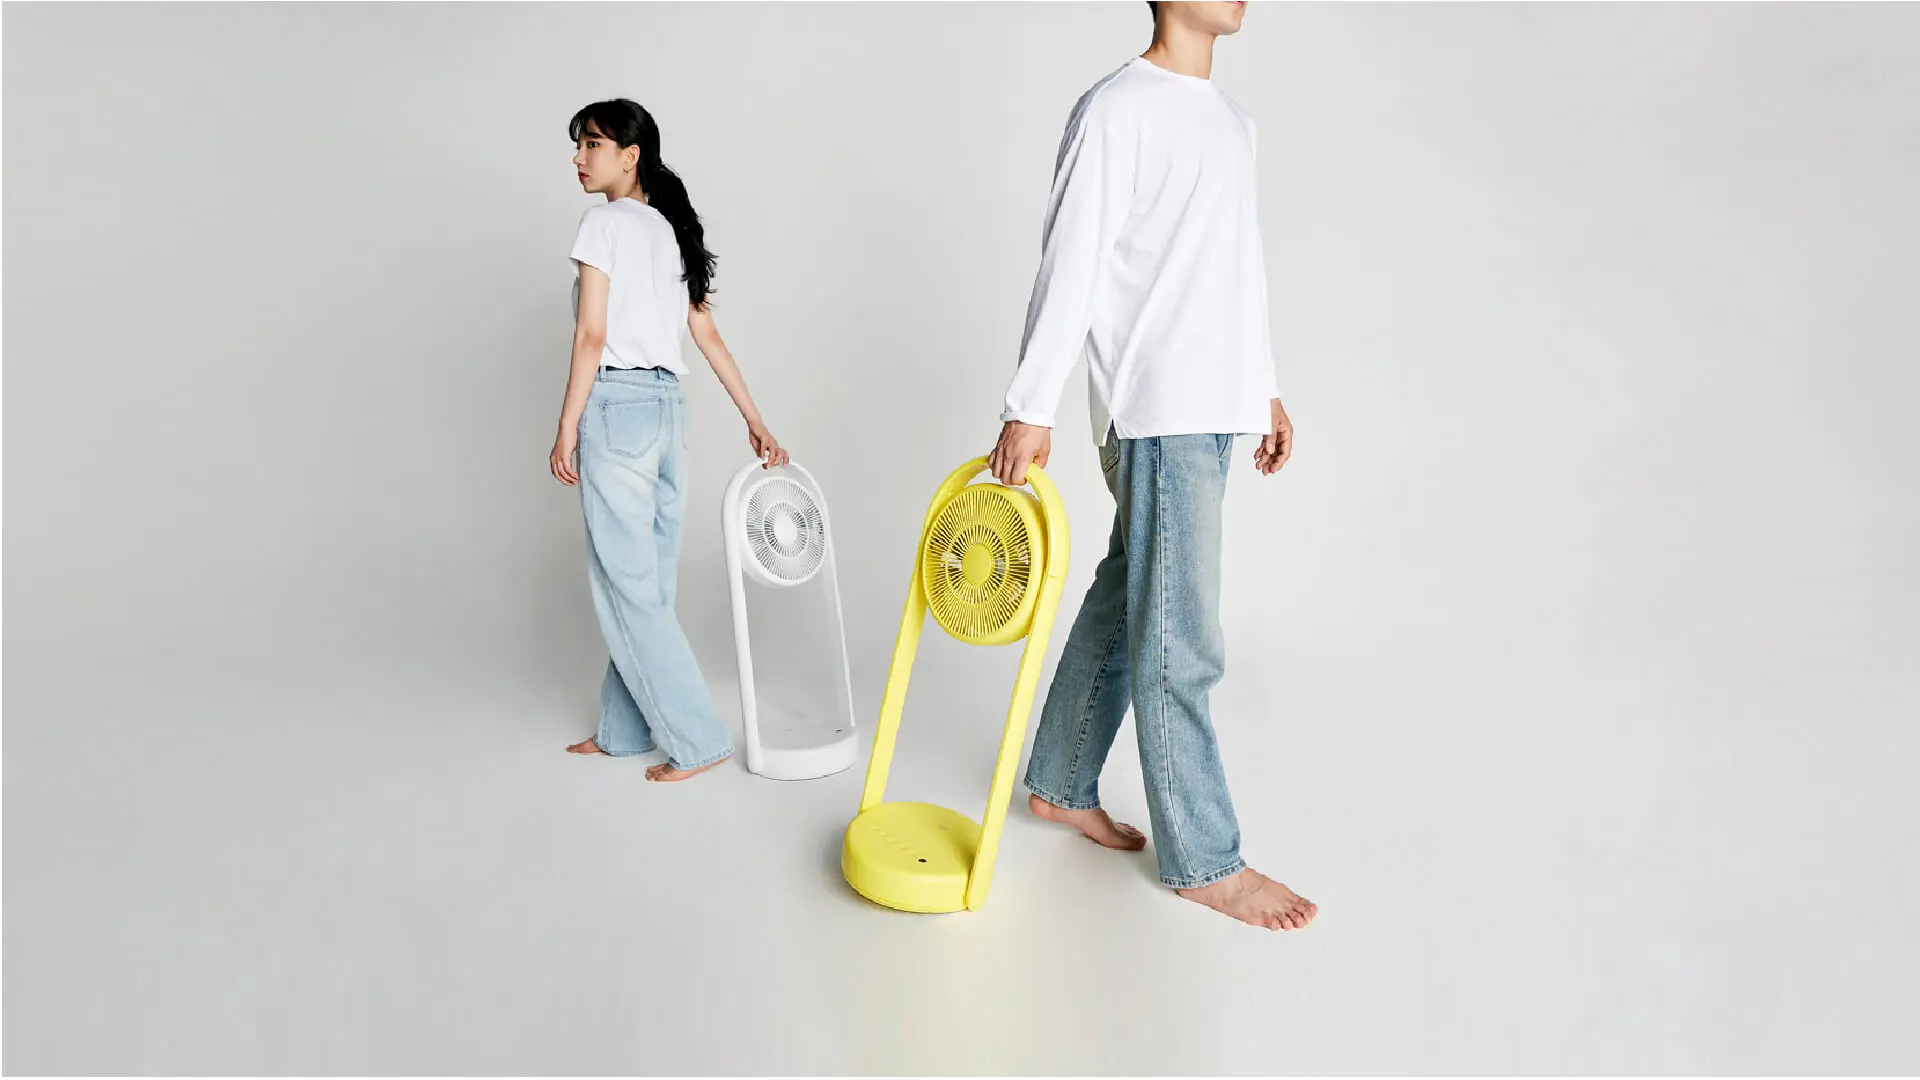 Clair foldable fan - in use